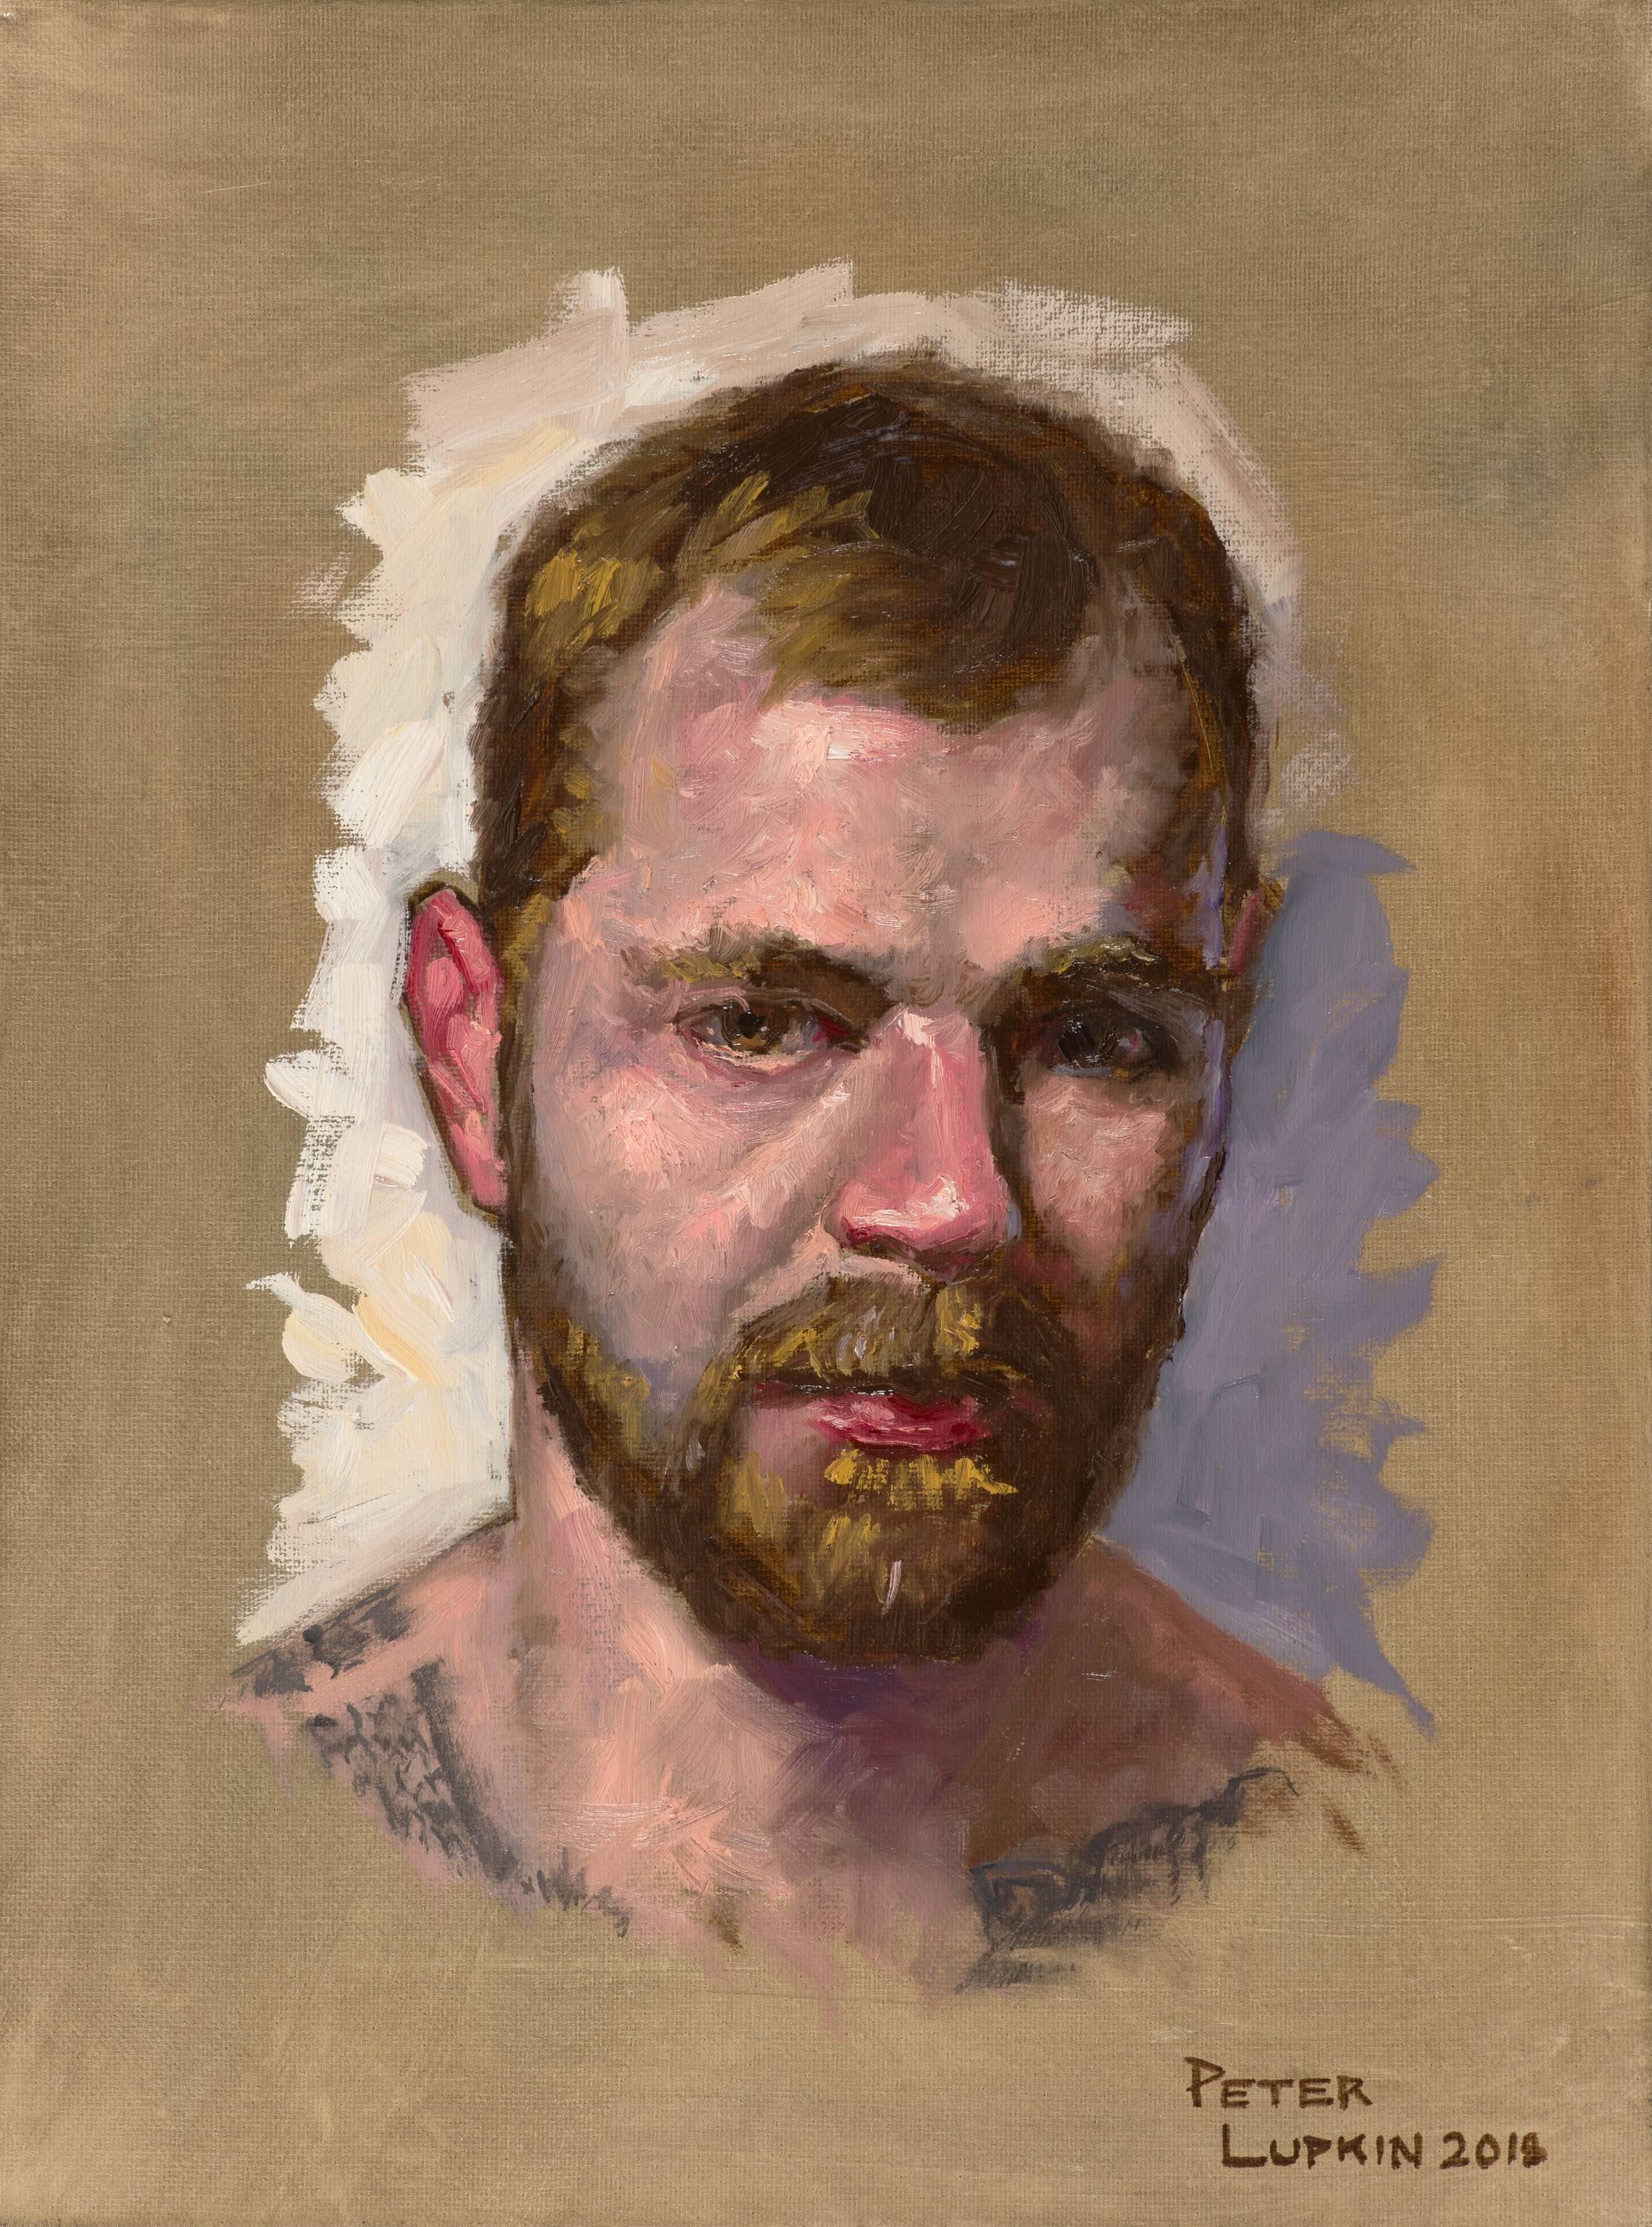 Peter Lupkin Portrait Painting - Doug, Male Figure with Tattoos, Full Beard and Mustache, Oil on Canvas, Framed